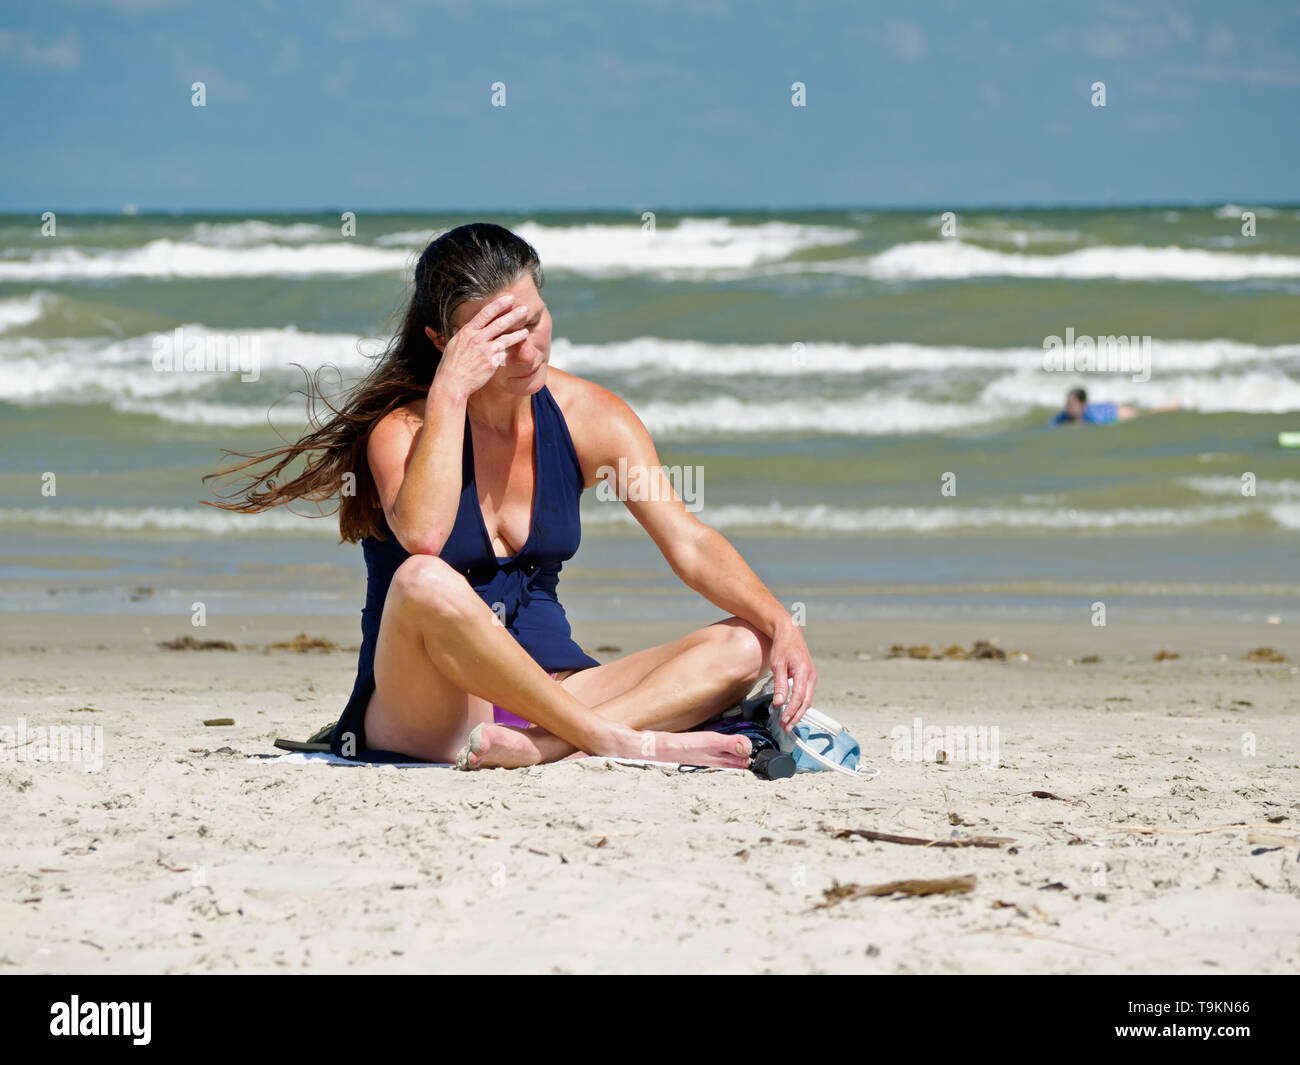 A brunette Caucasian woman sits cross legged on the beach with her hand to her forehead as if not feeling well, perhaps suffering from a headache. Stock Photo